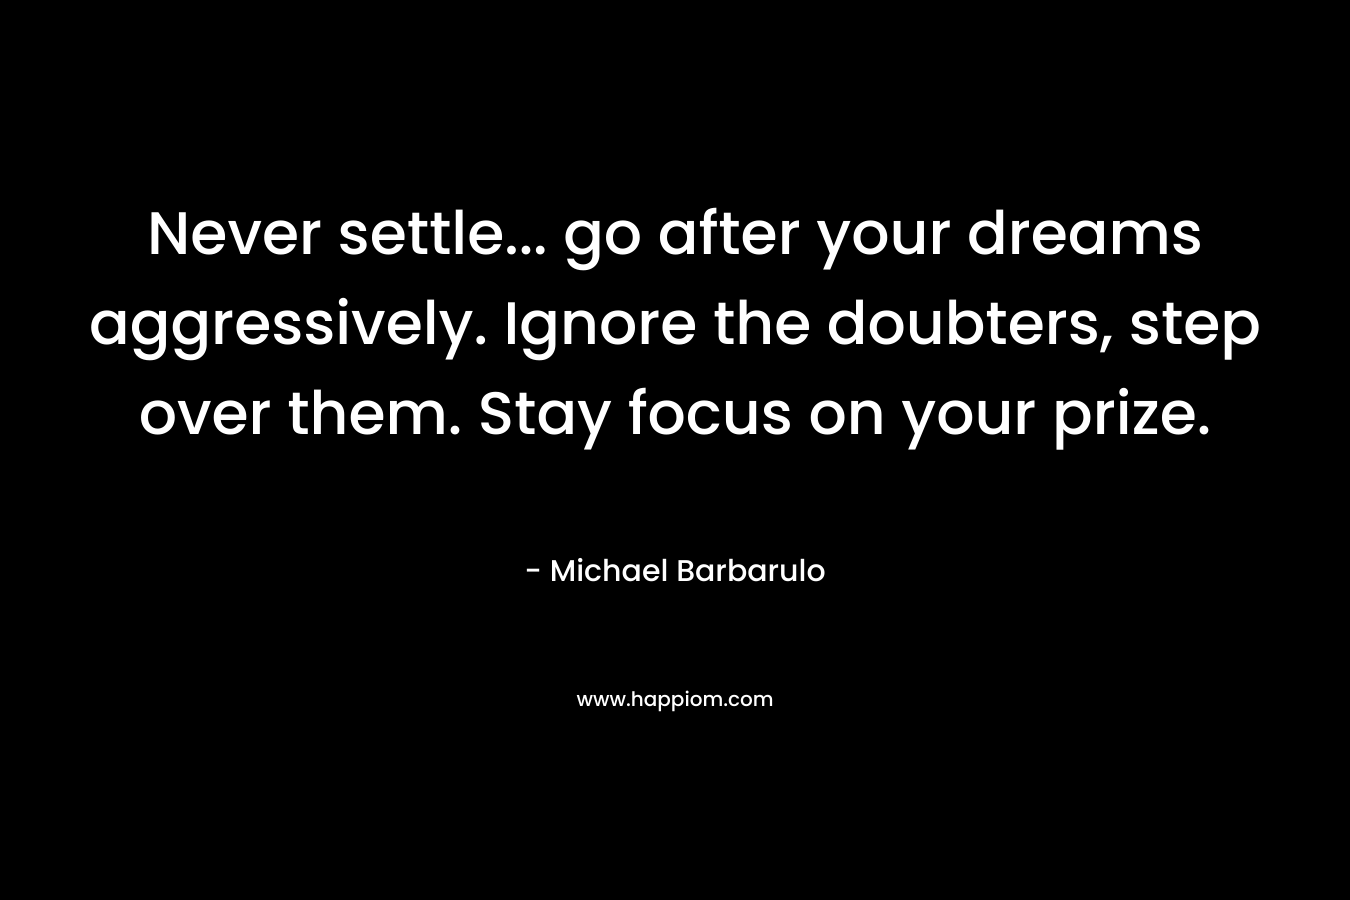 Never settle… go after your dreams aggressively. Ignore the doubters, step over them. Stay focus on your prize. – Michael Barbarulo